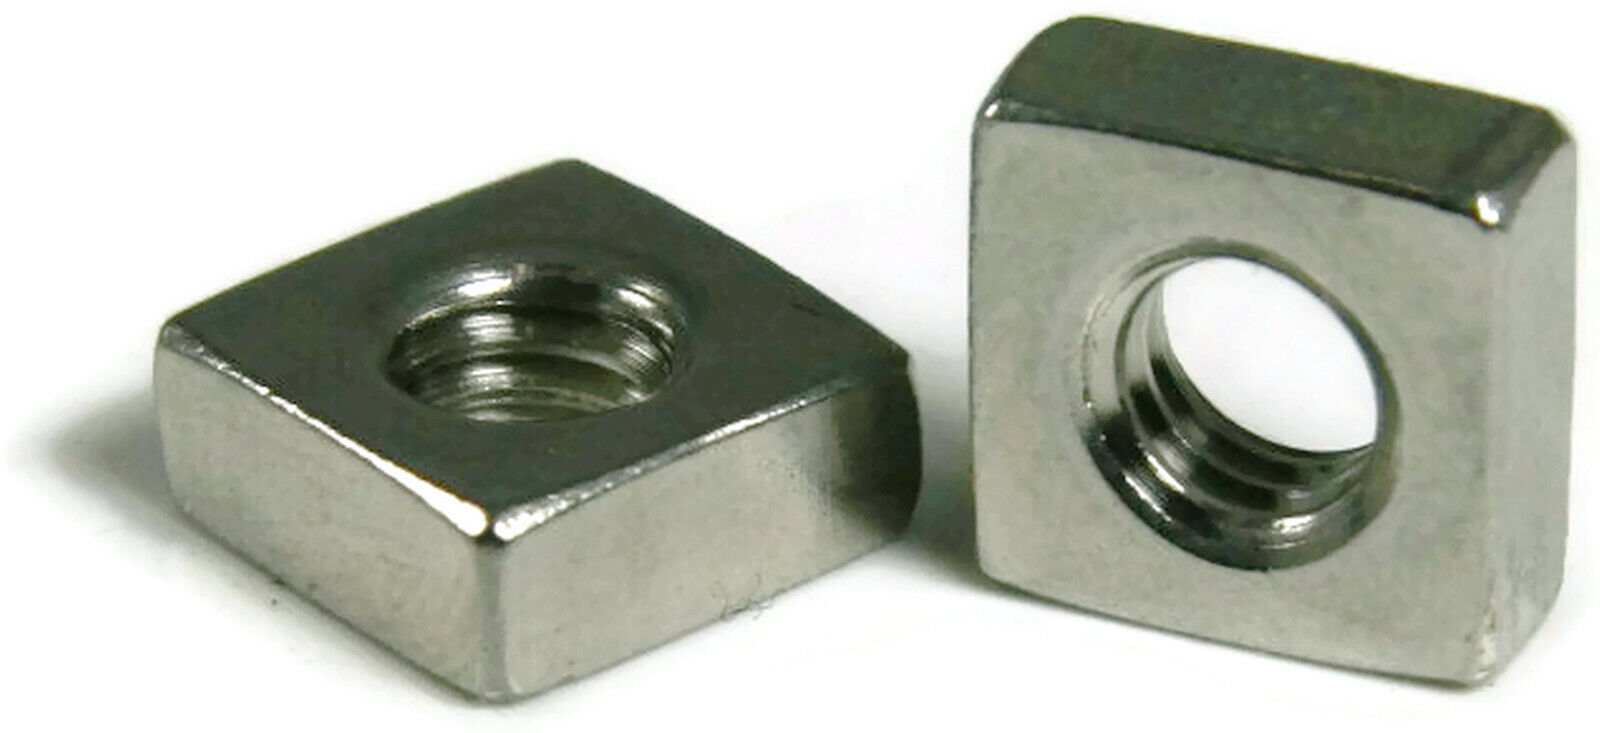 18-8 Stainless Steel Square Nuts Four-Sided Nuts - Coarse and Fine - Select Size